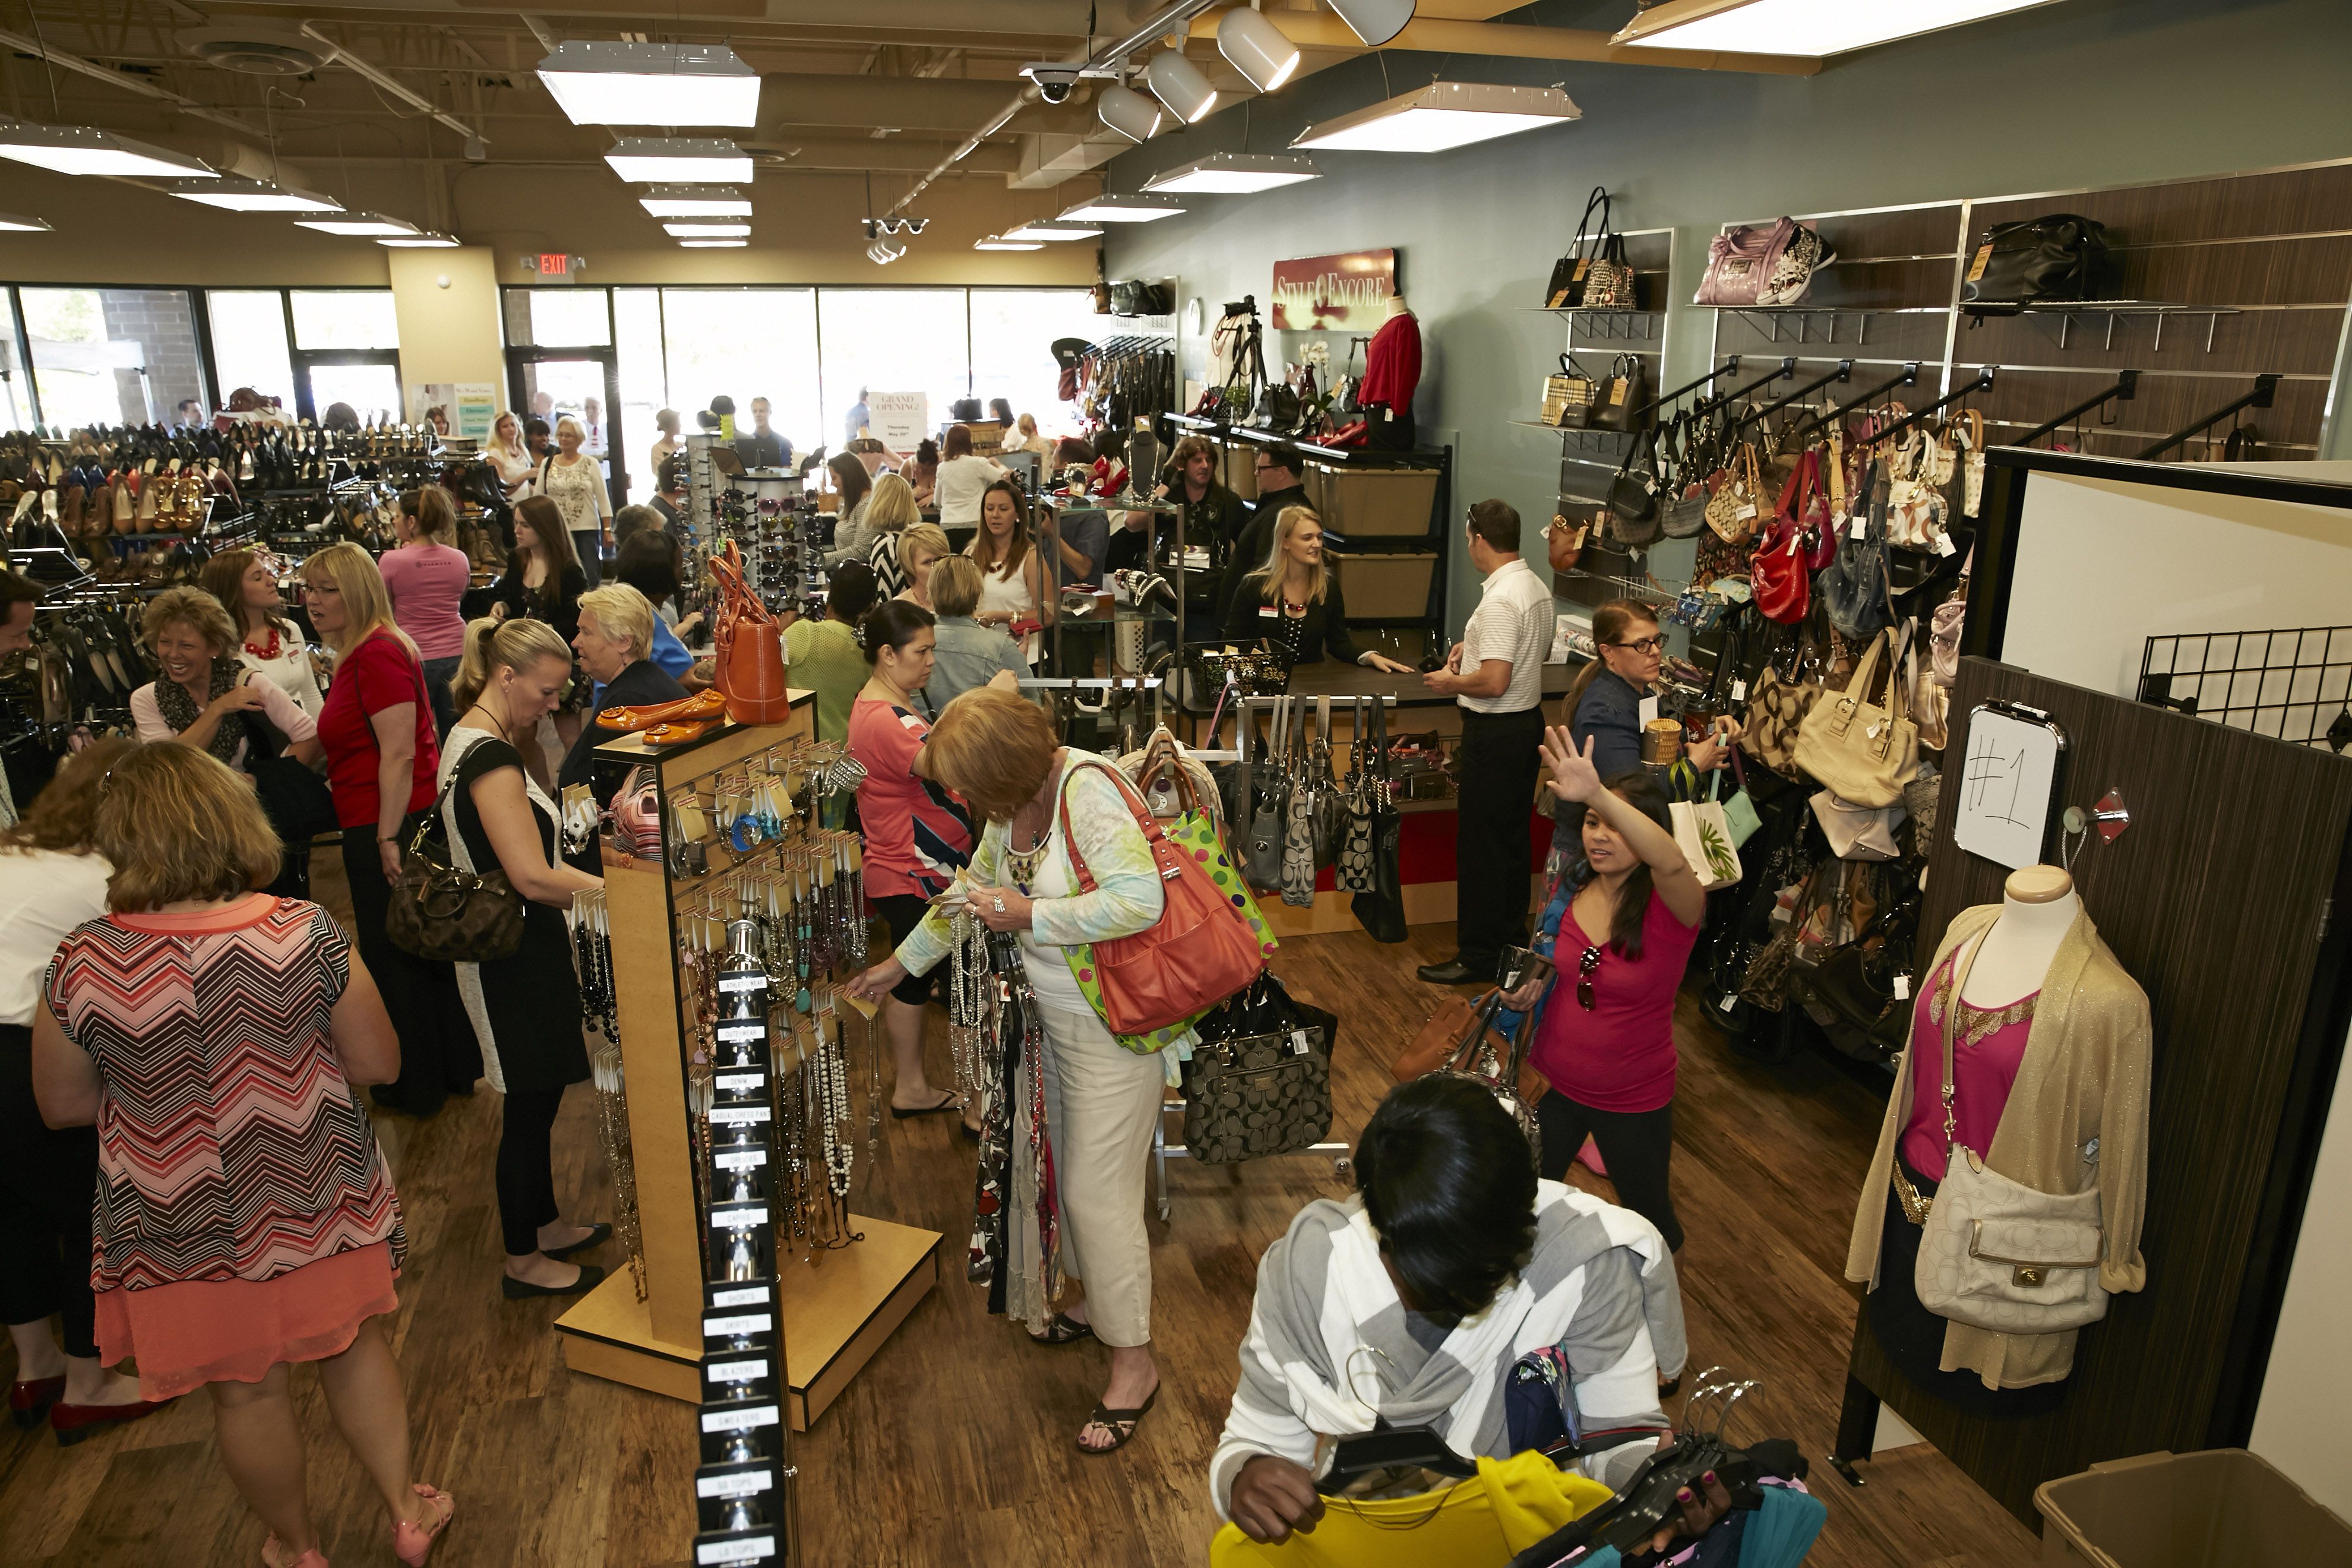 What We Buy, Gently Used Women's Clothing, Style Encore